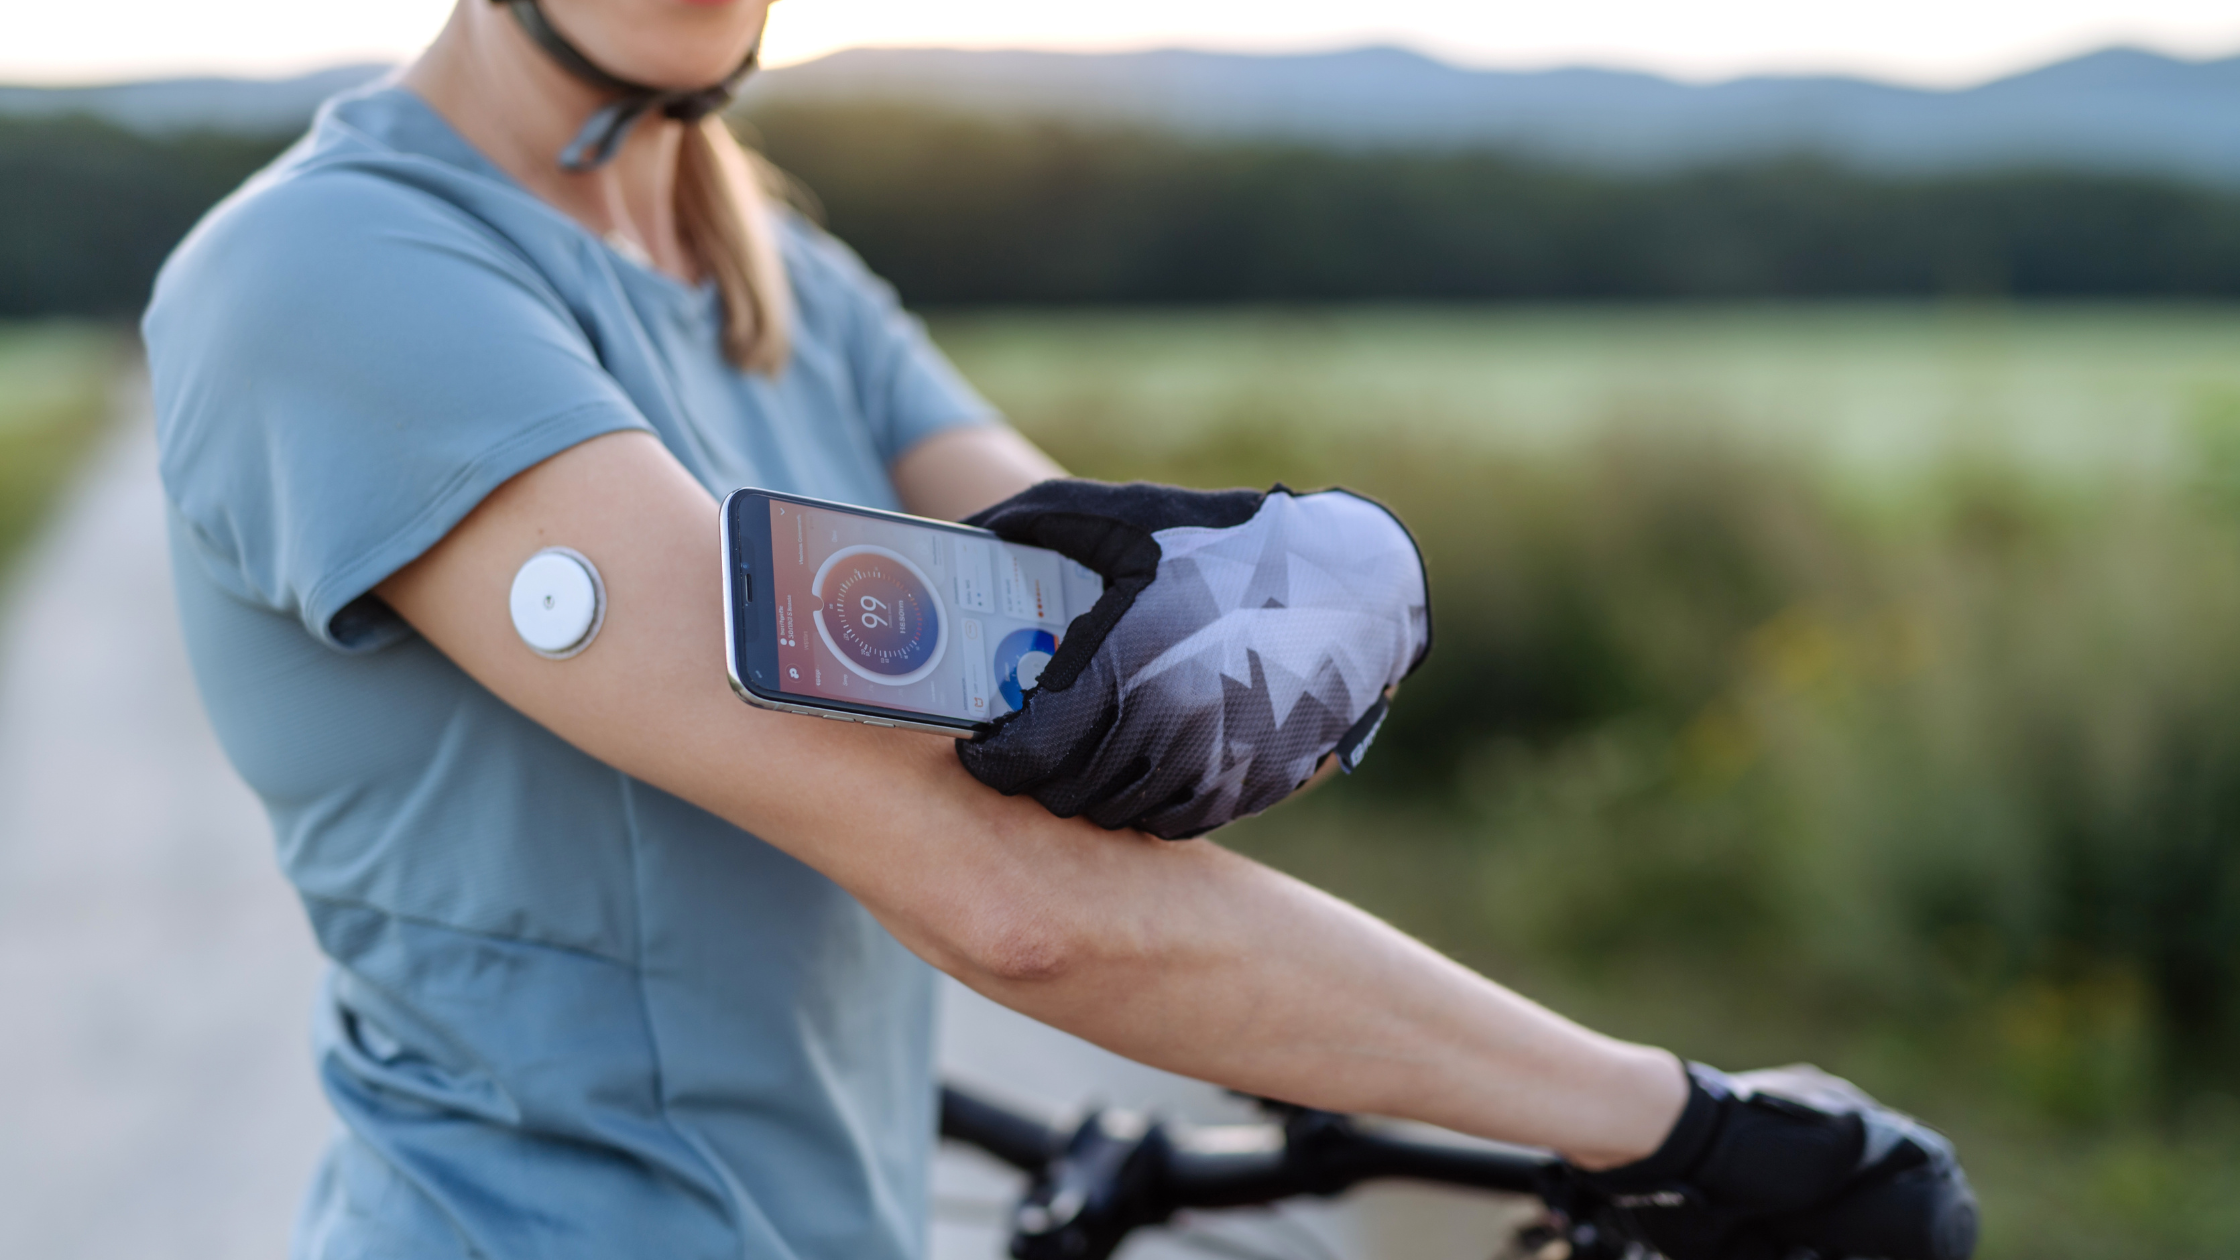 woman on bicycle using CGM device to track blood sugar levels during workout